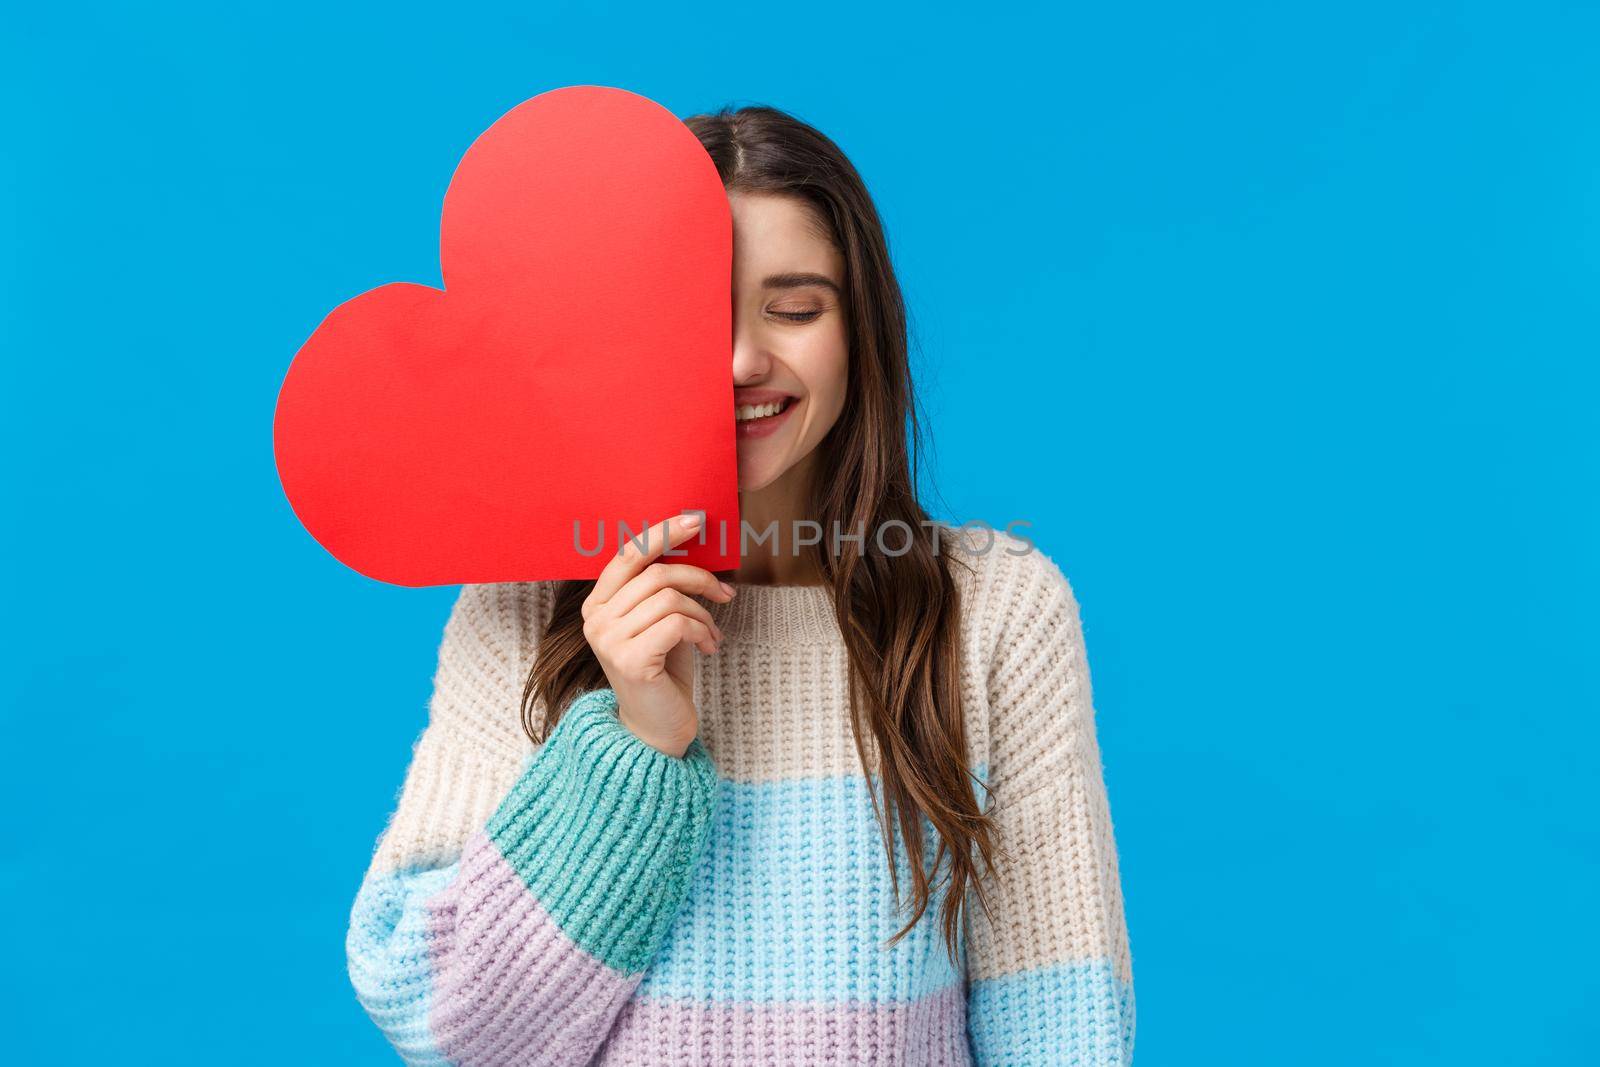 Happiness, relationship and love concept. Carefree happy good-looking woman holding big cute red heart sign over half face, laughing with closed eyes, blushing and feeling loved, blue background.